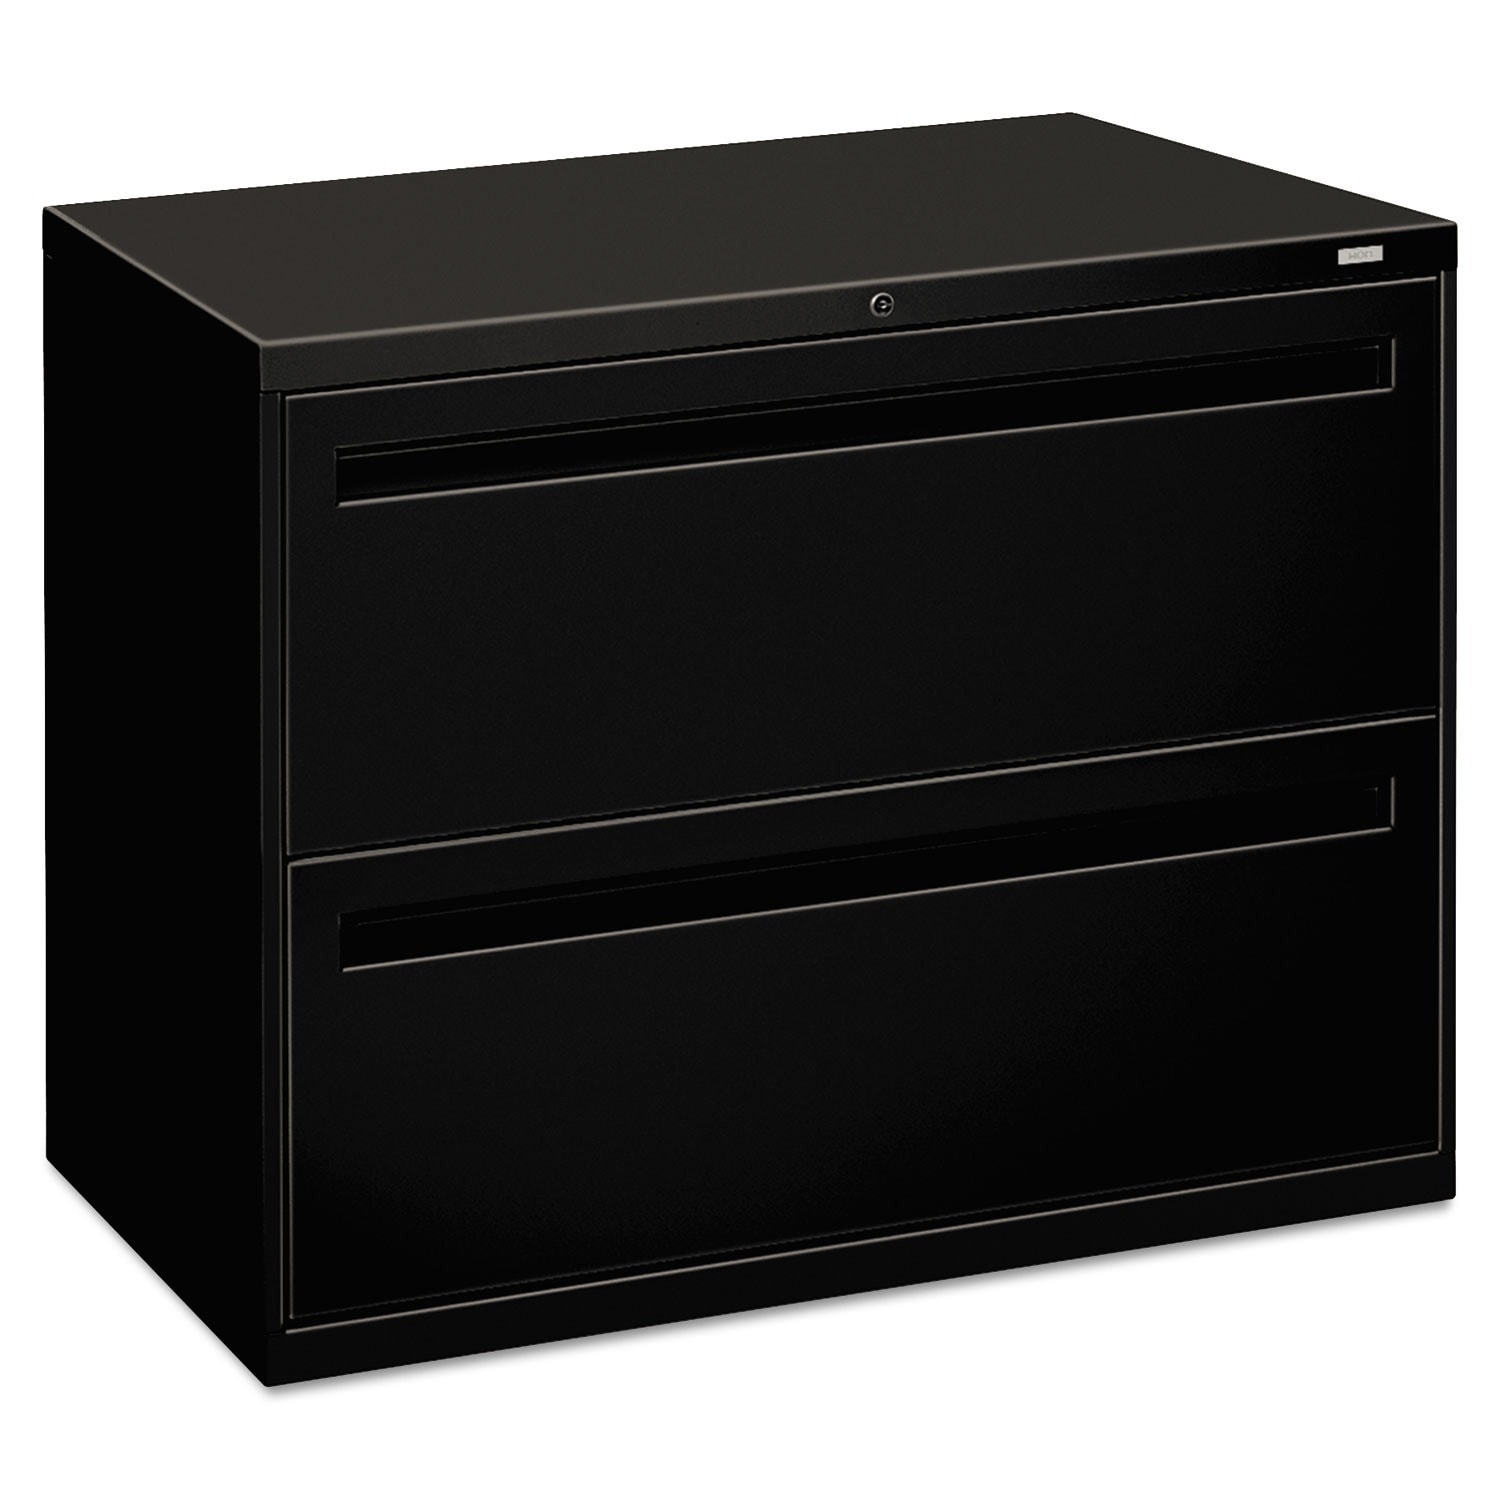 HON 700 Series Black 2 Drawer Lateral File Cabinet Free Shipping